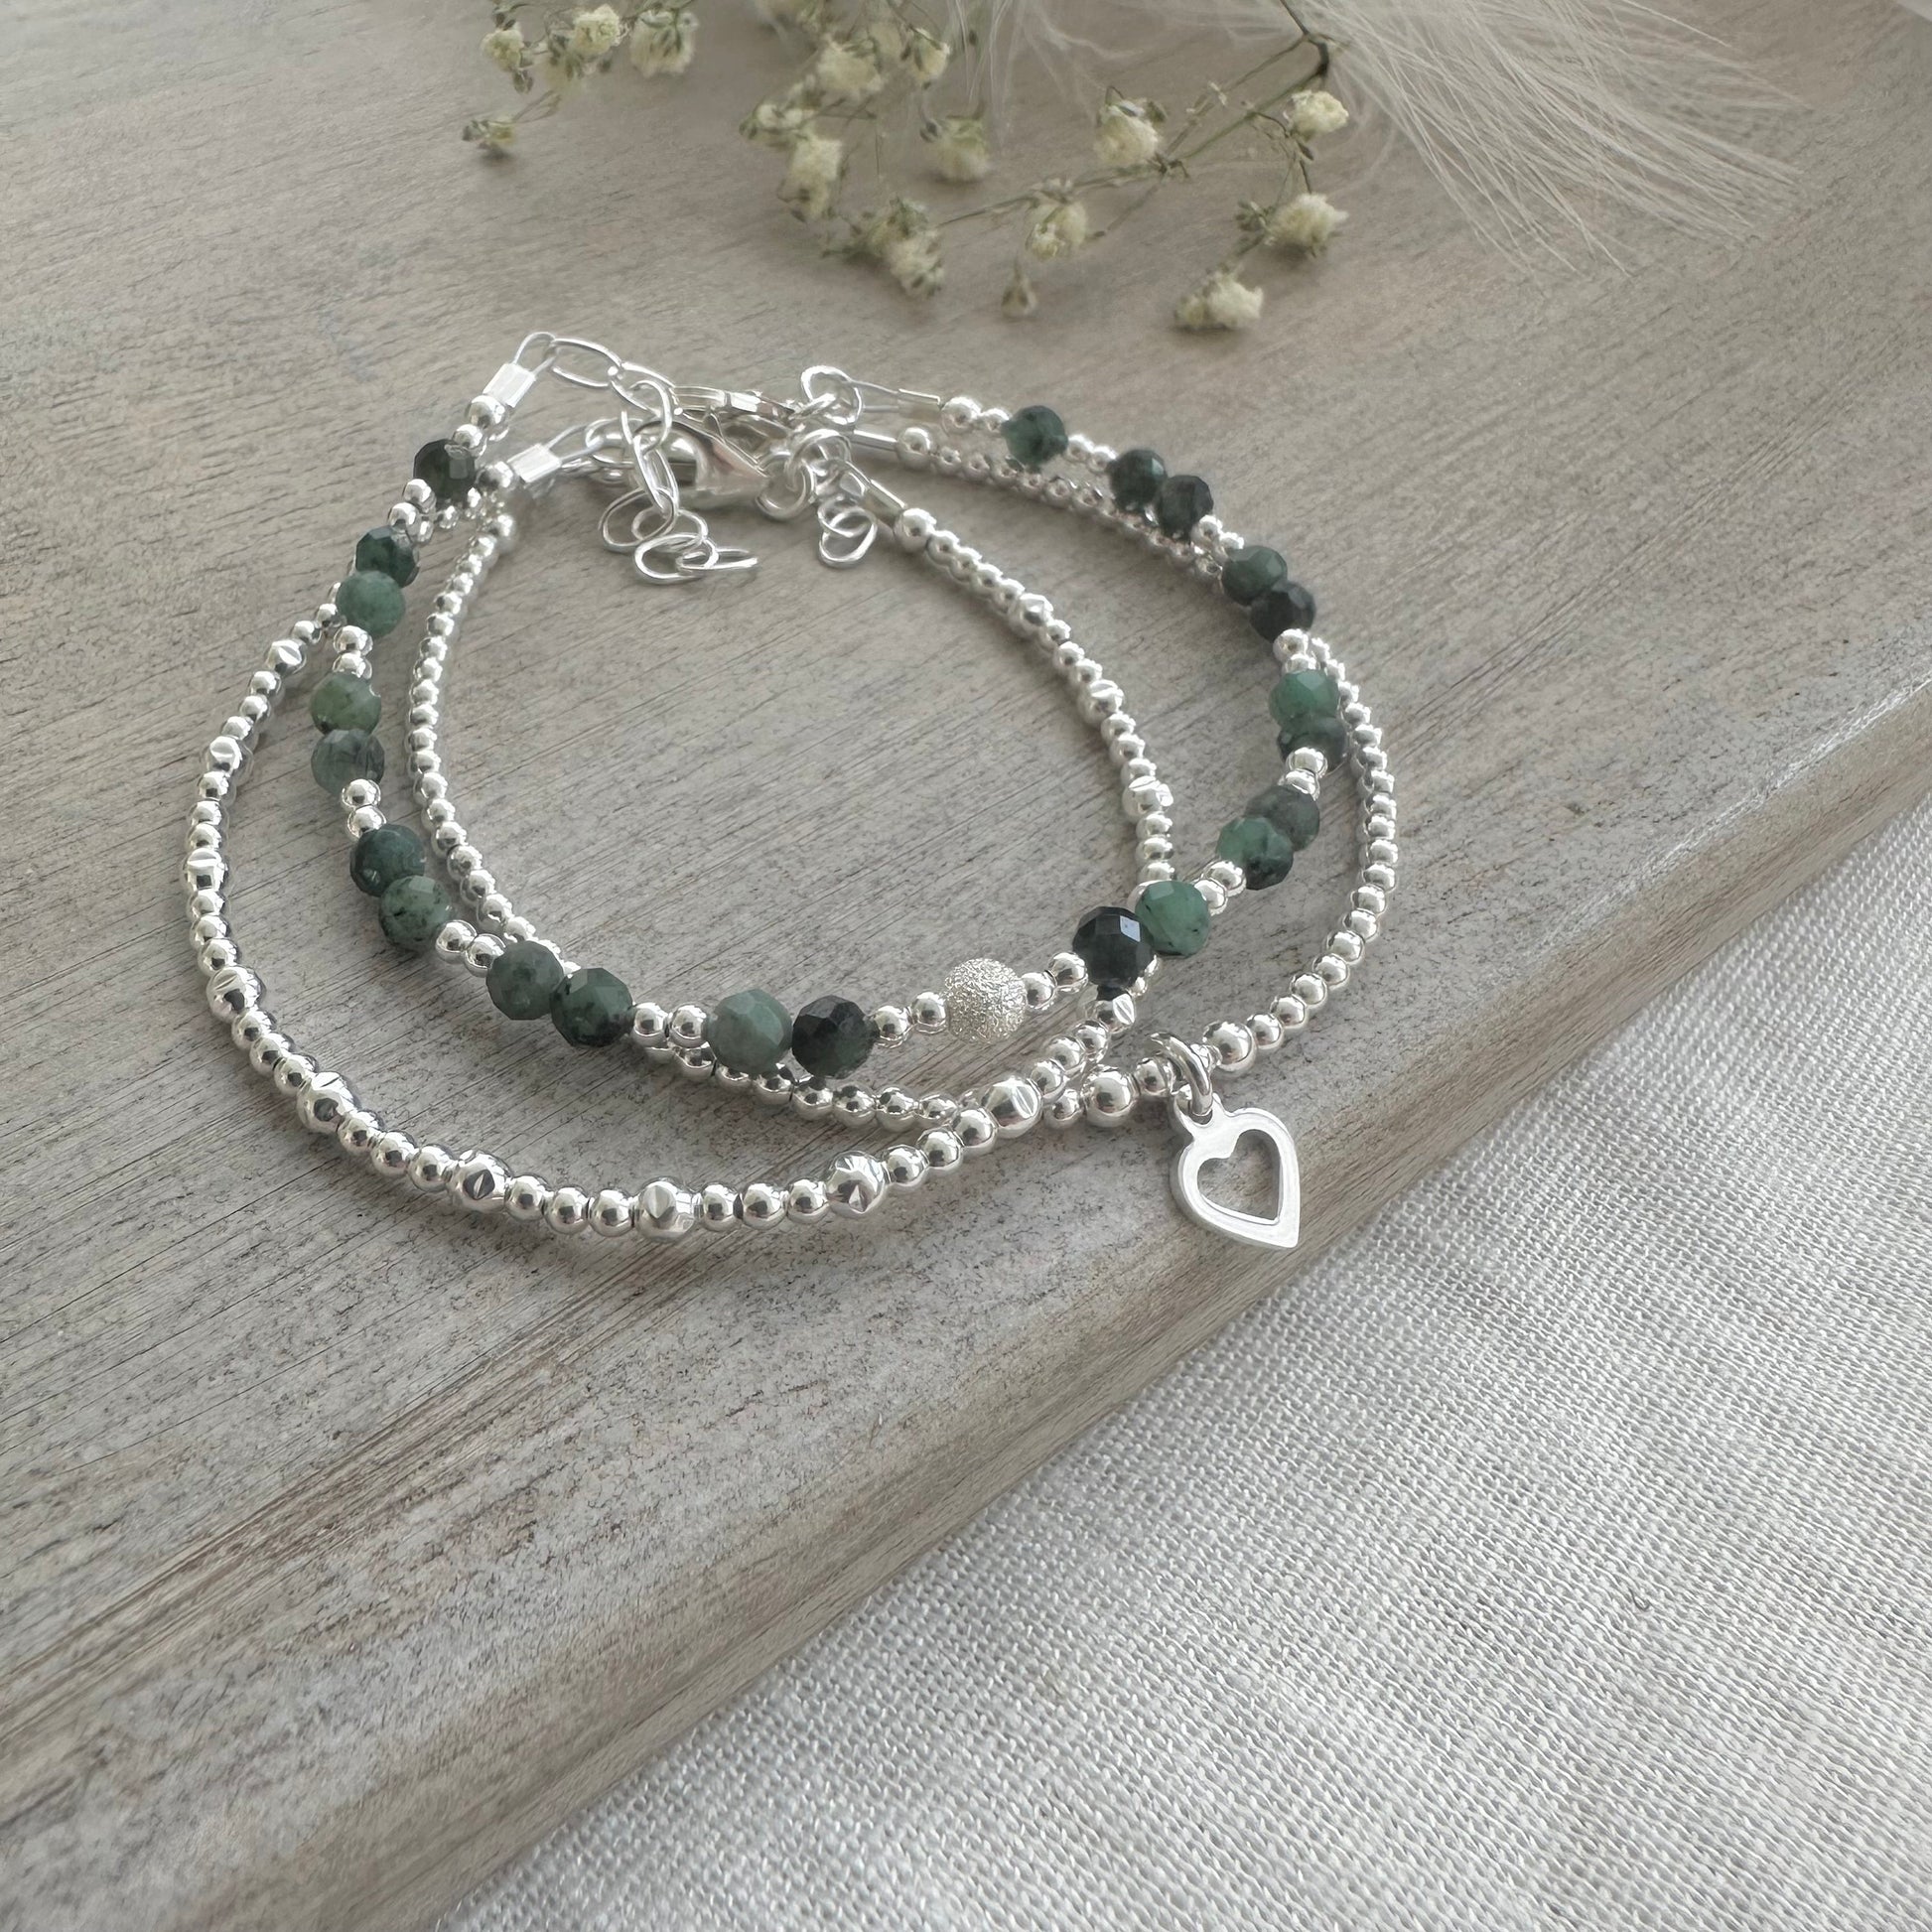 A Dainty May Birthstone Emerald Bracelet Set, May Stacking Bracelets for Women in Sterling Silver